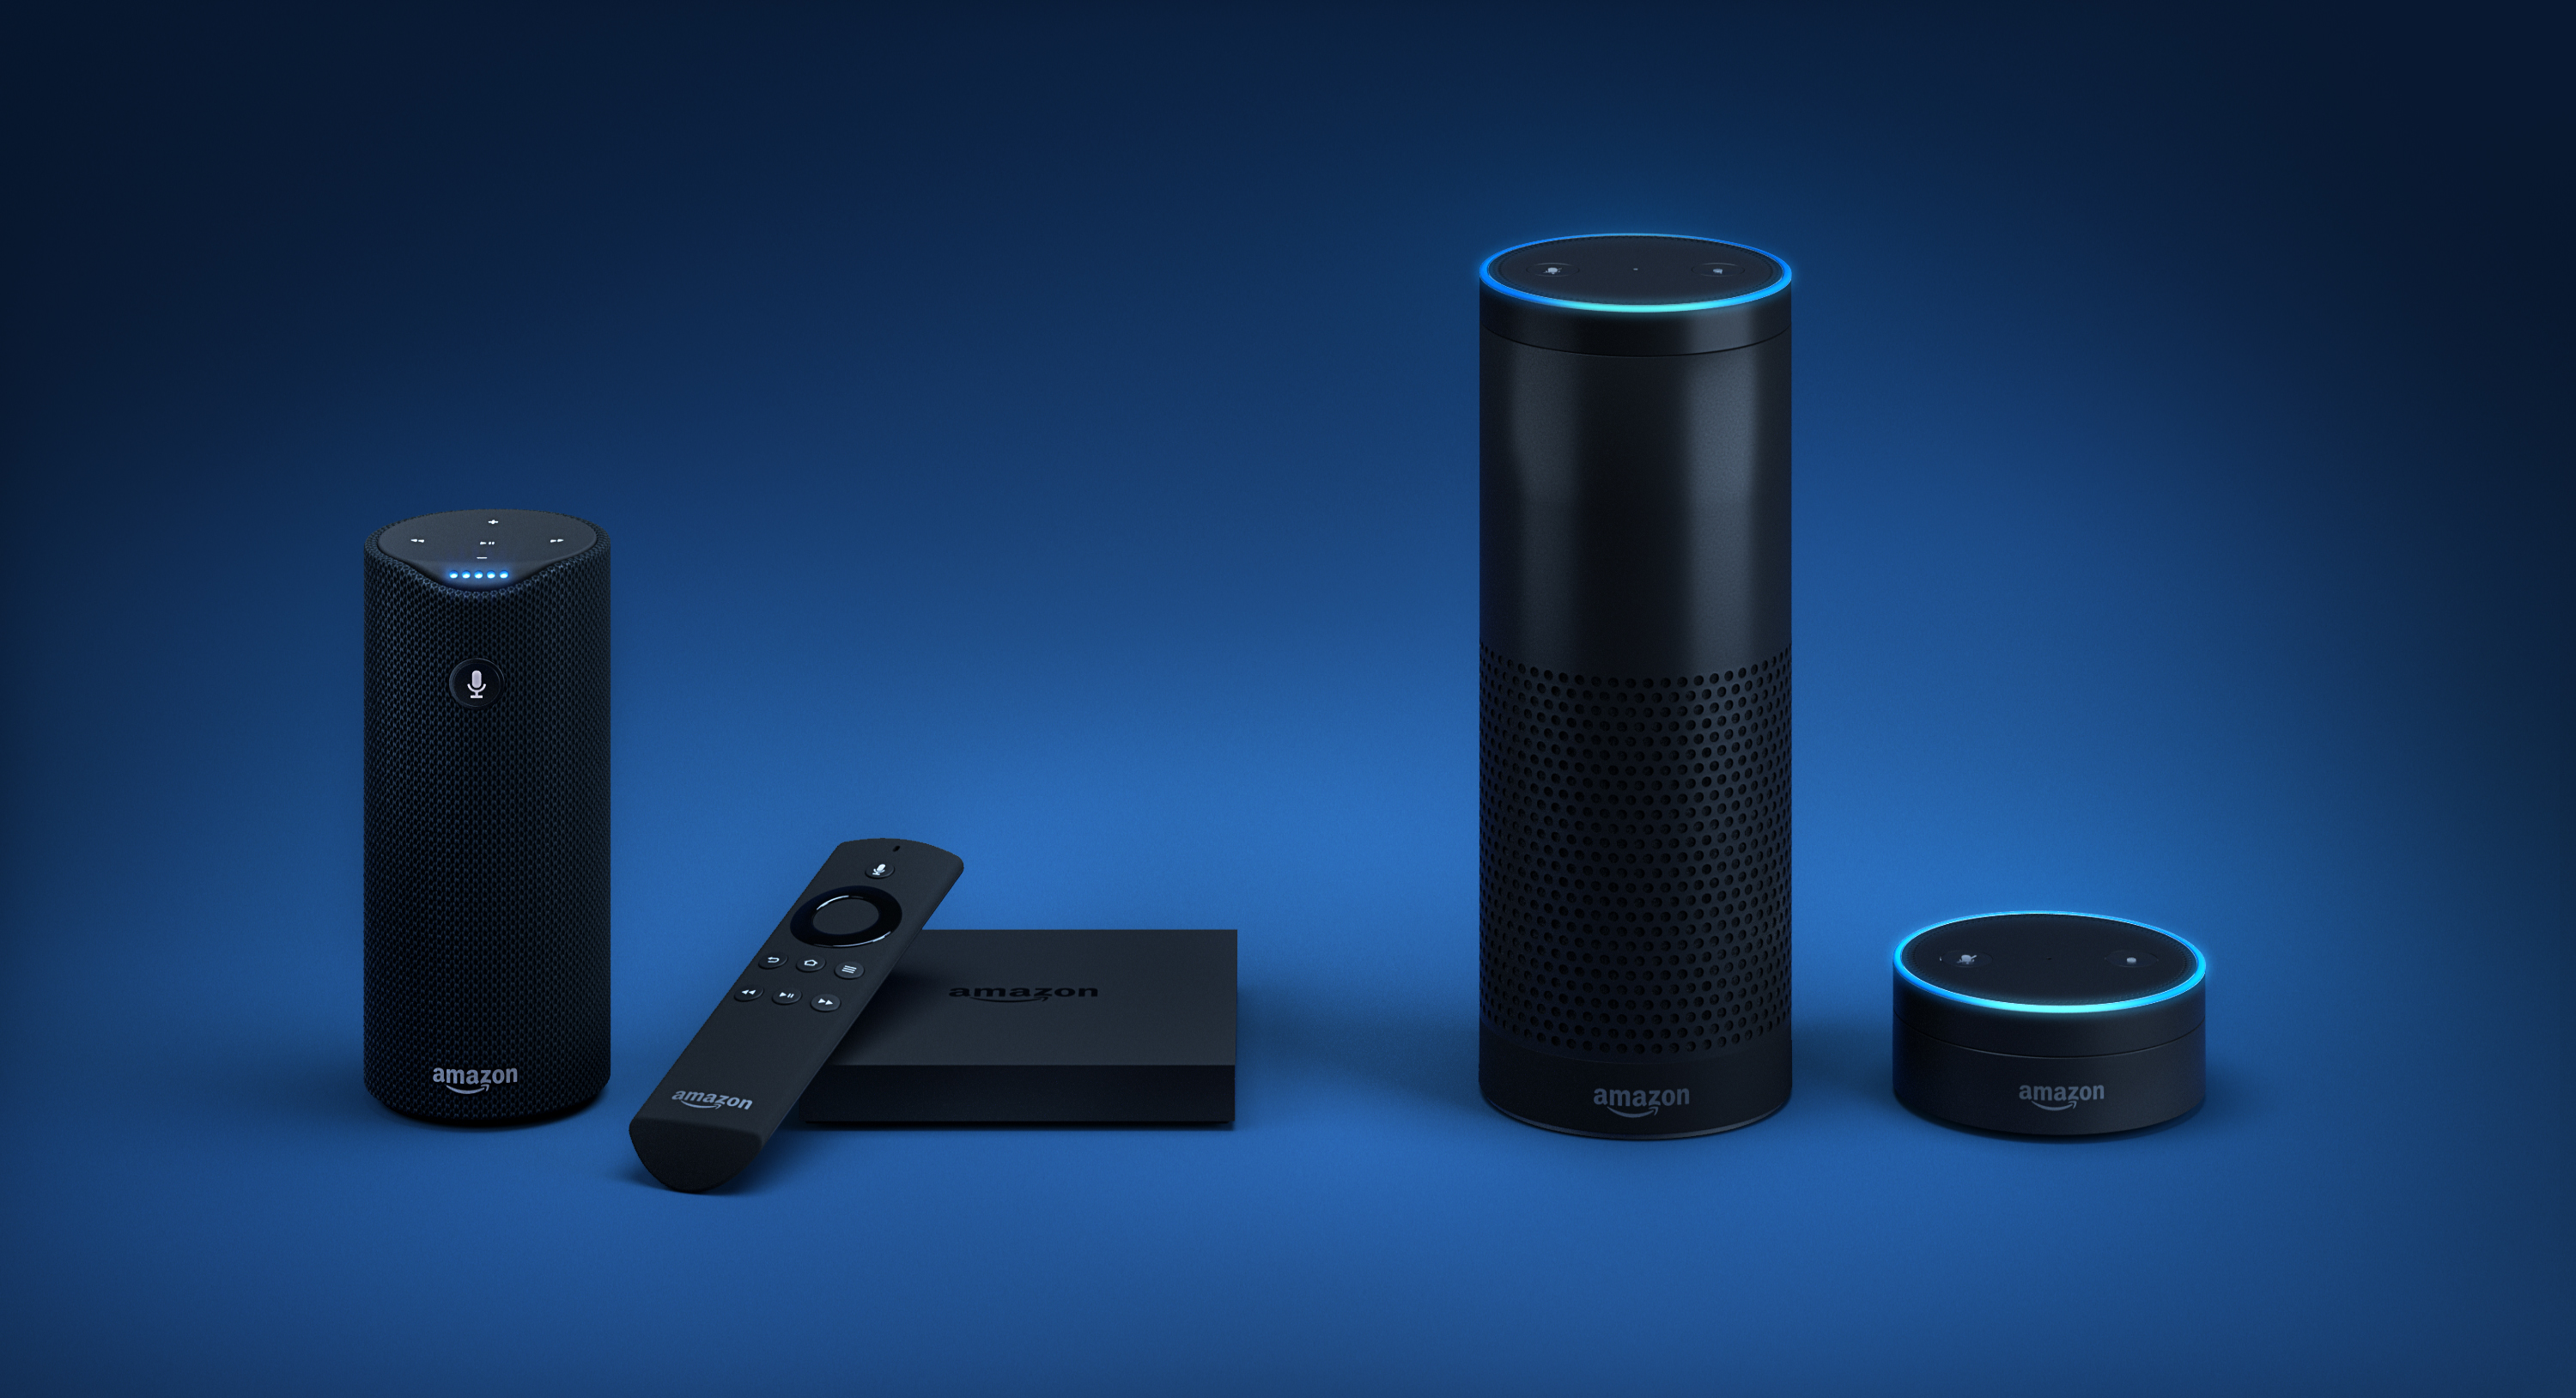 You Can Now Tell Amazon’s Alexa To Order Millions Of Prime-Eligible Items